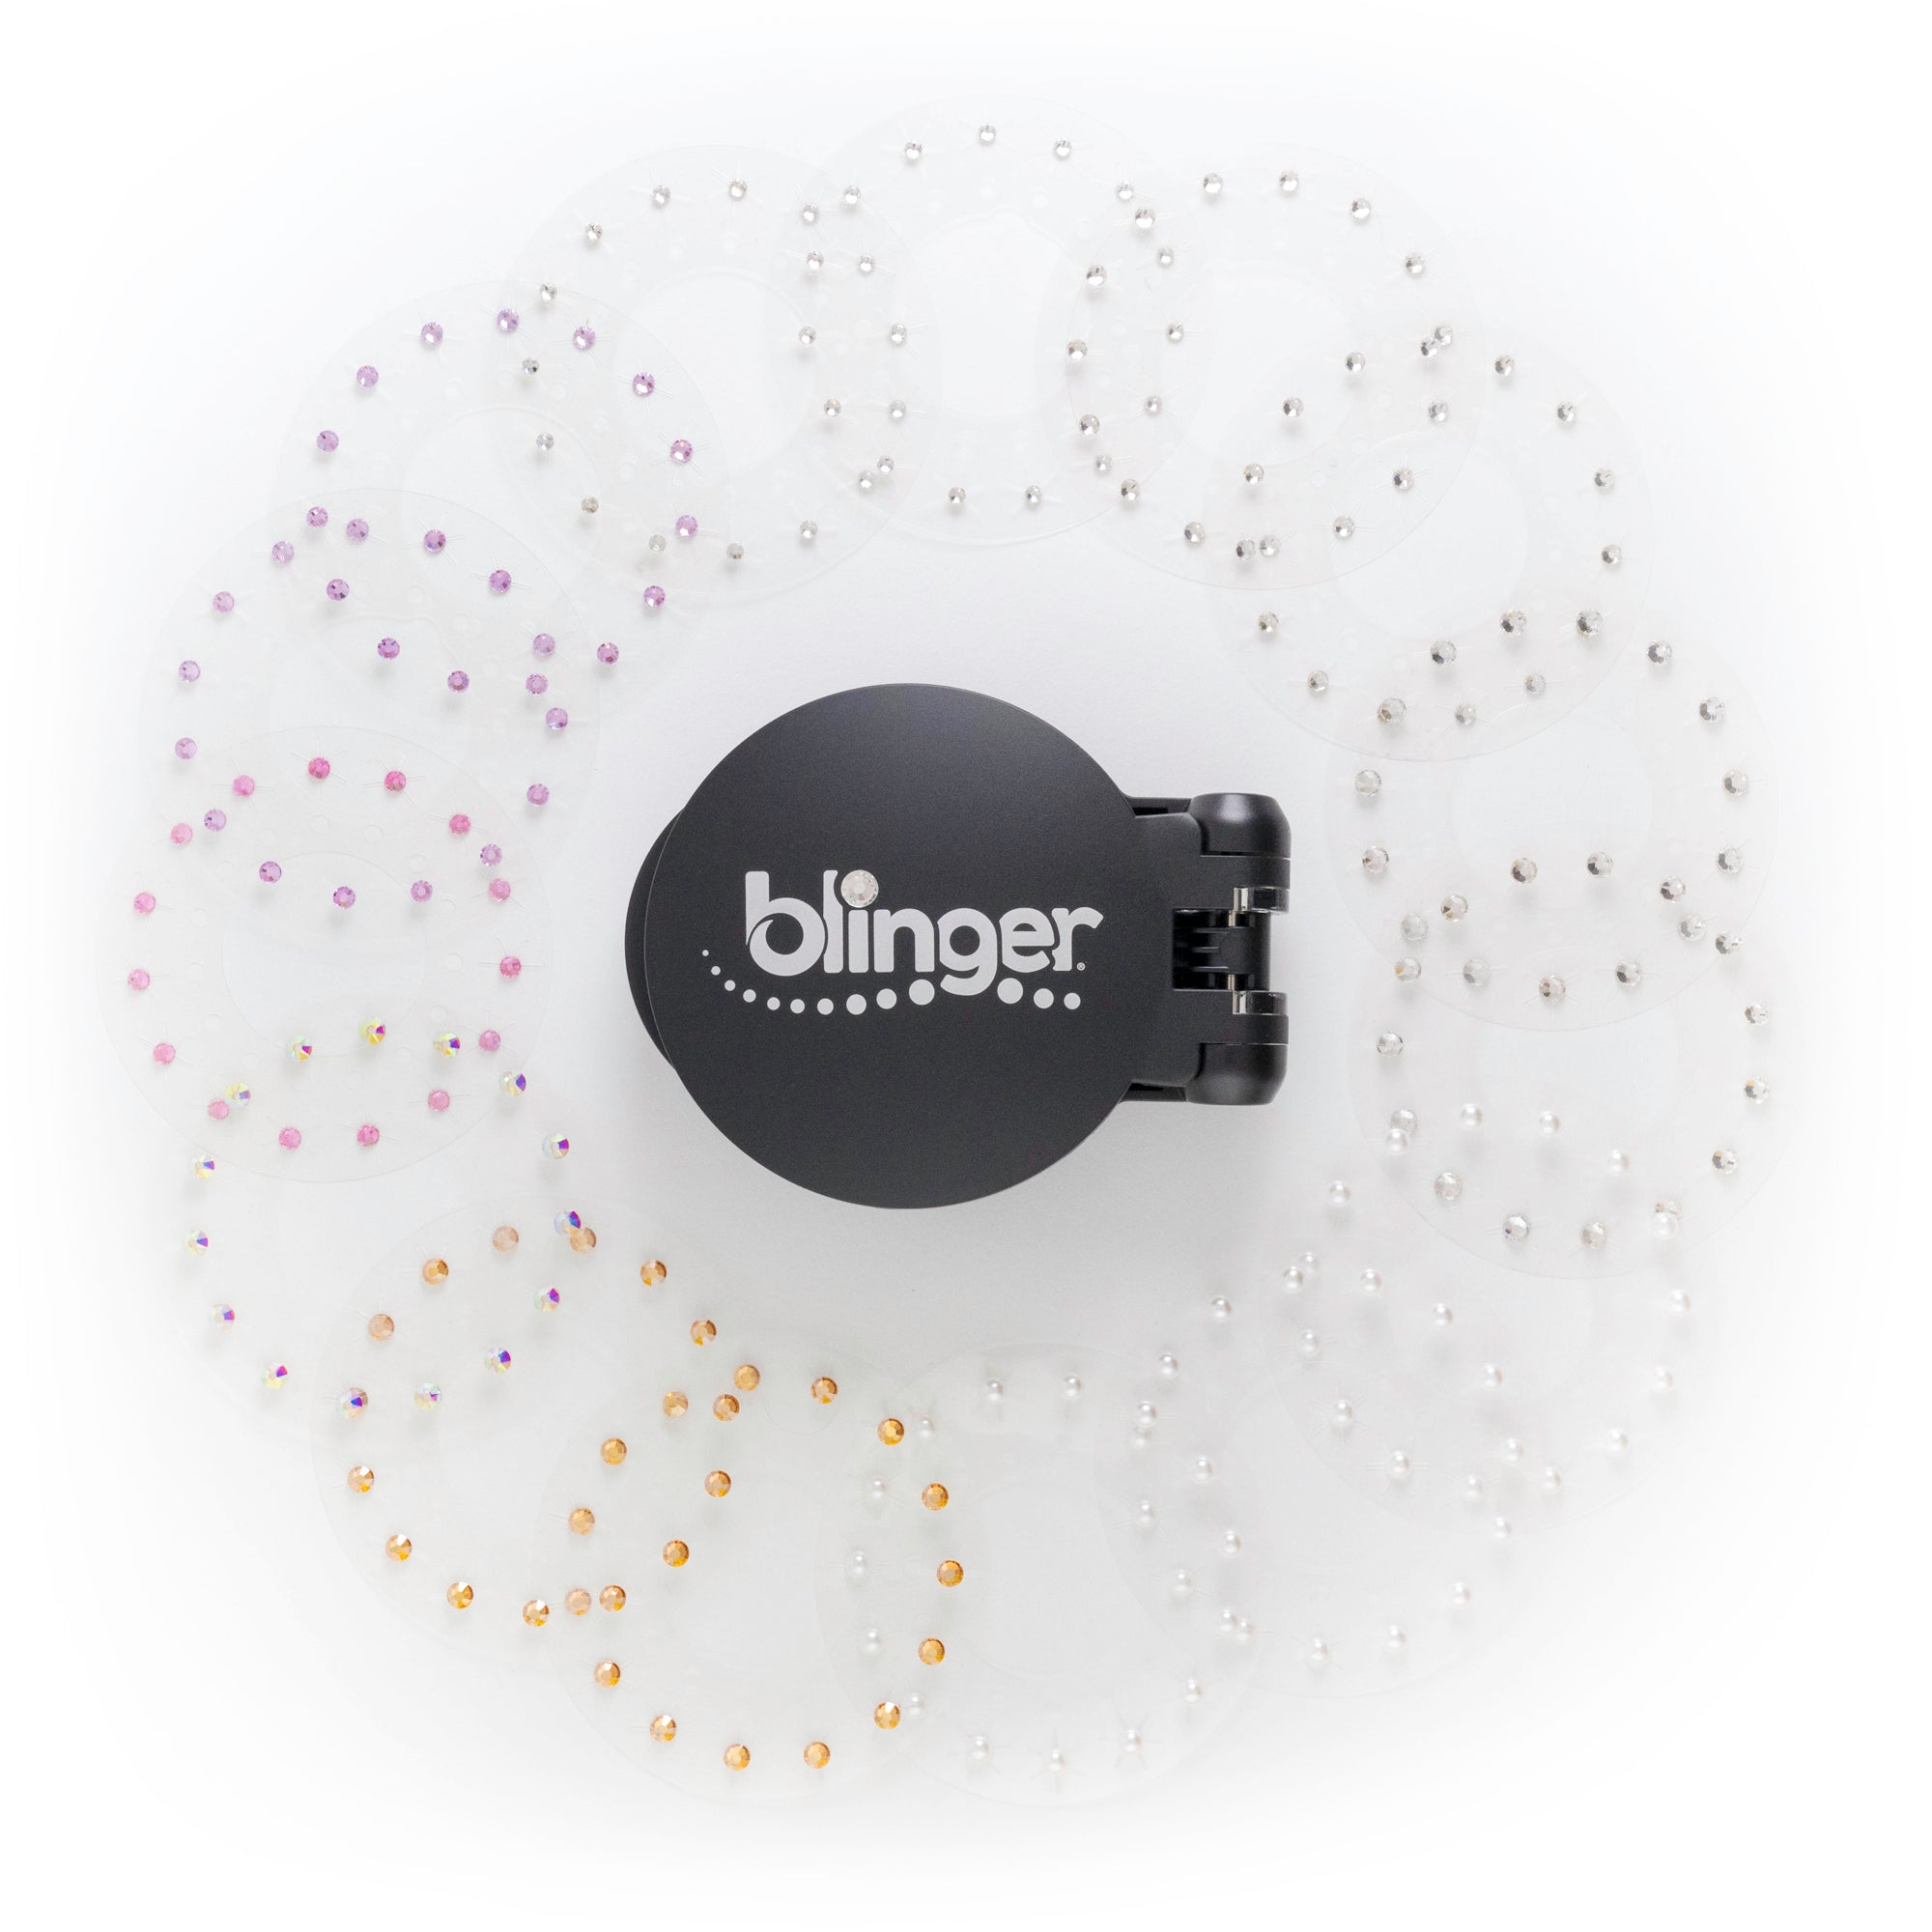 blinger Starter Kit | Women's Hair Styling Tool + 75 Precision-Cut Glass  Crystals | Bling Hair in Seconds! Bedazzling Multi-Faceted Gems | Hair-Safe  –